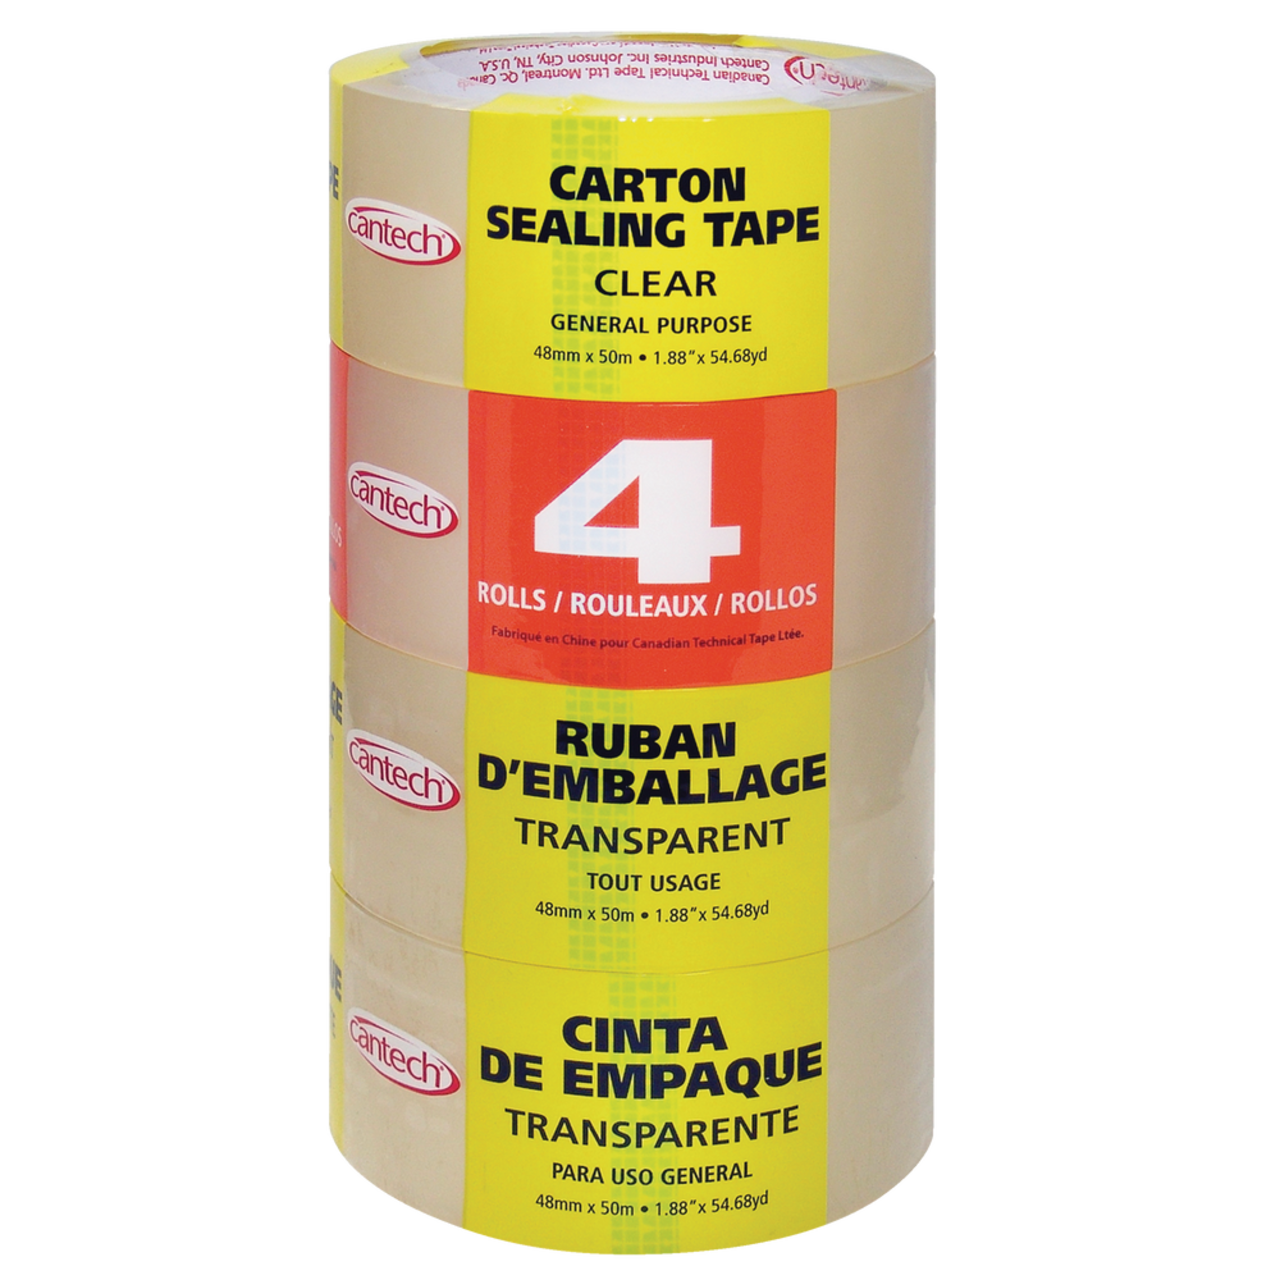 https://media-www.canadiantire.ca/product/fixing/paint/surface-prep-maintenance/0676117/box-sealing-tape-clear-48mmx50mx4rolls-b7514f32-dfb4-4417-bee0-b1903b4b2afd.png?imdensity=1&imwidth=640&impolicy=mZoom